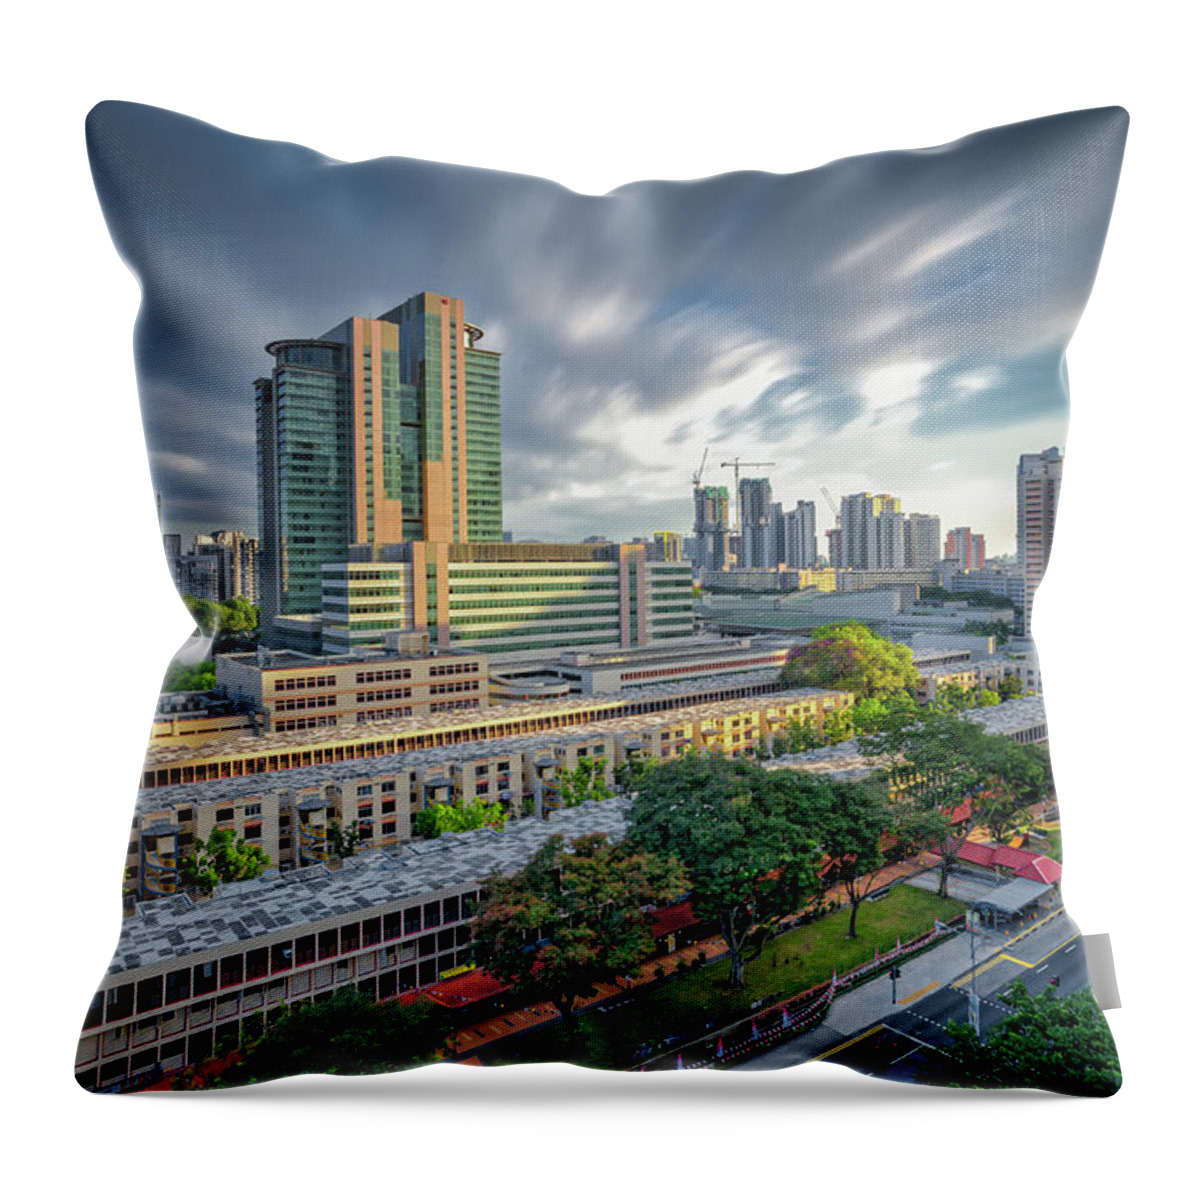 Outdoors Throw Pillow featuring the photograph Tpy In Colors by Azrin Az